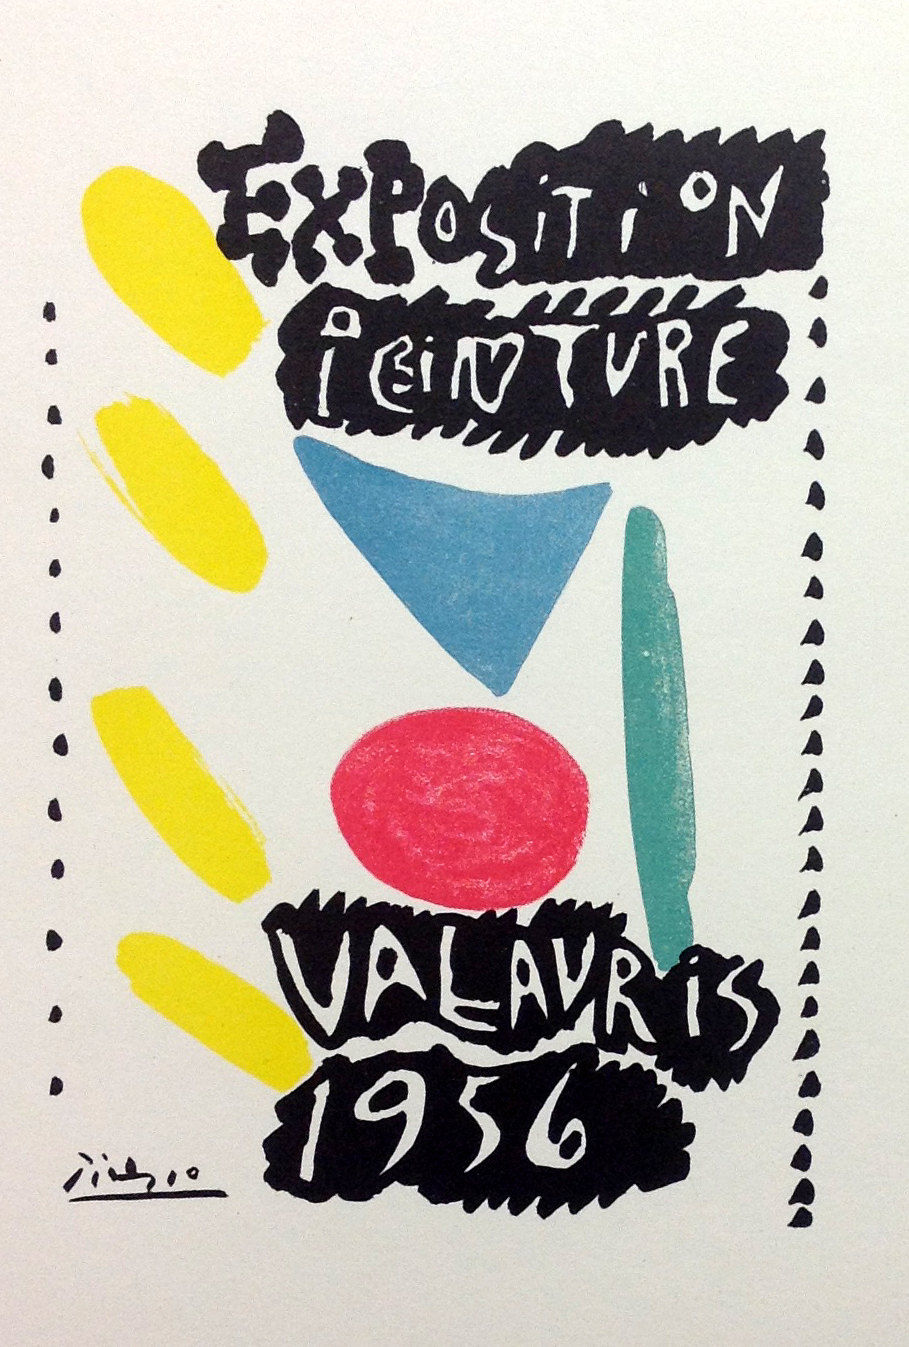 Picasso Lithograph 81, Valauris 1956, Art in posters